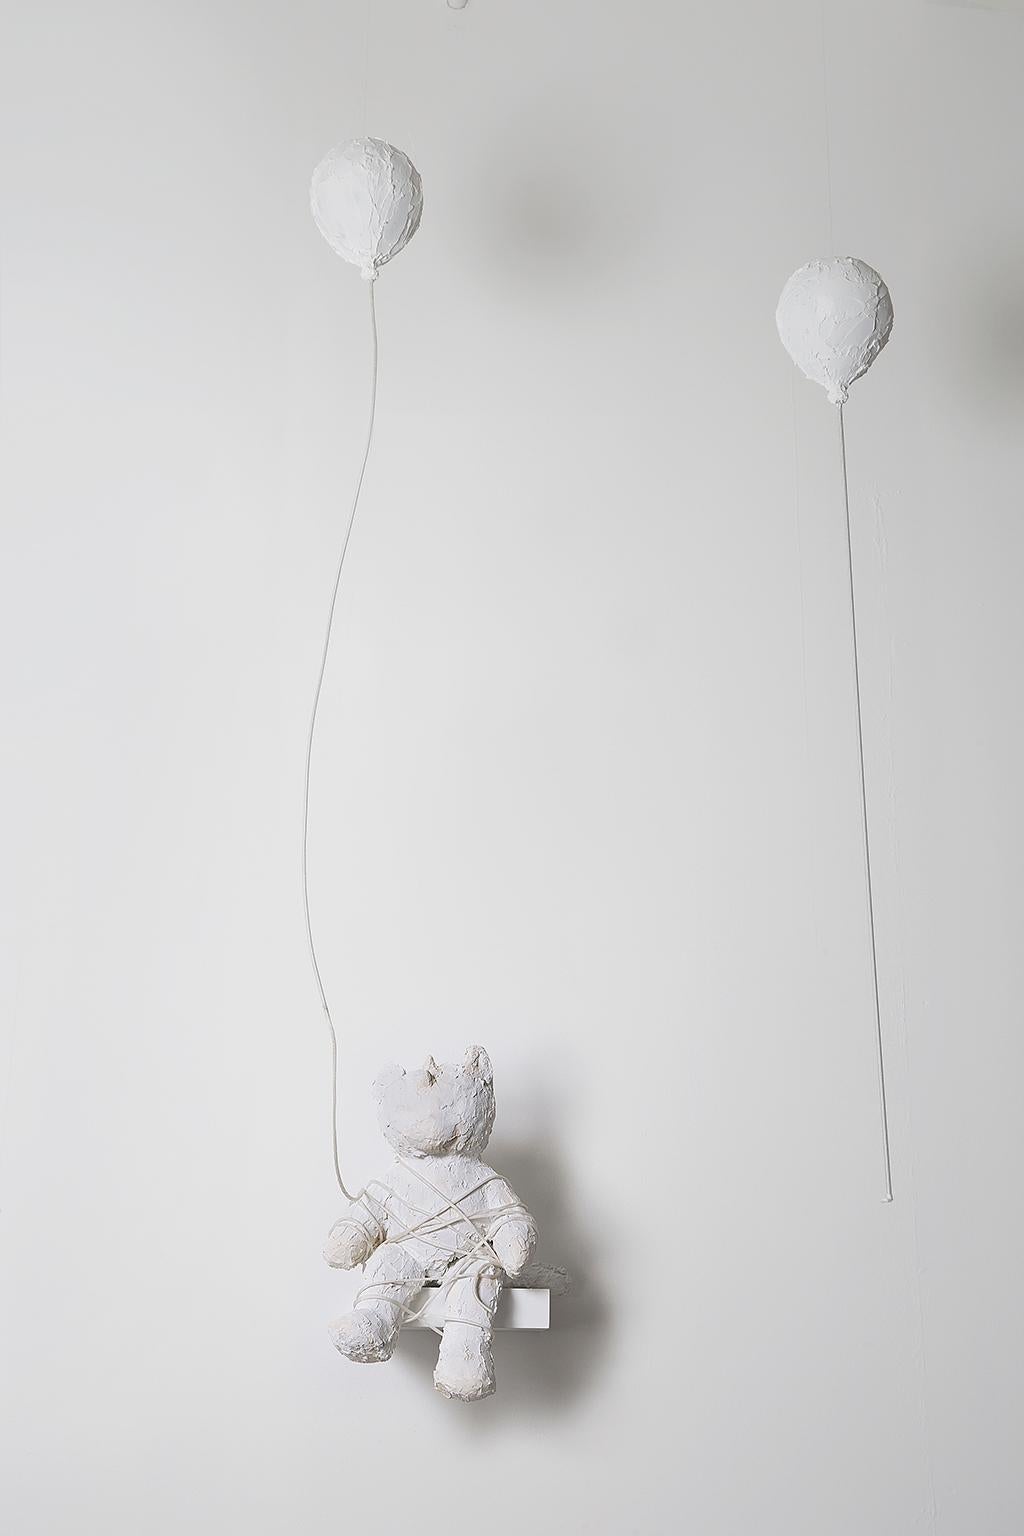 Ivy Naté Figurative Sculpture - Sculpture of Bear with balloons: 'Bear with Balloons'